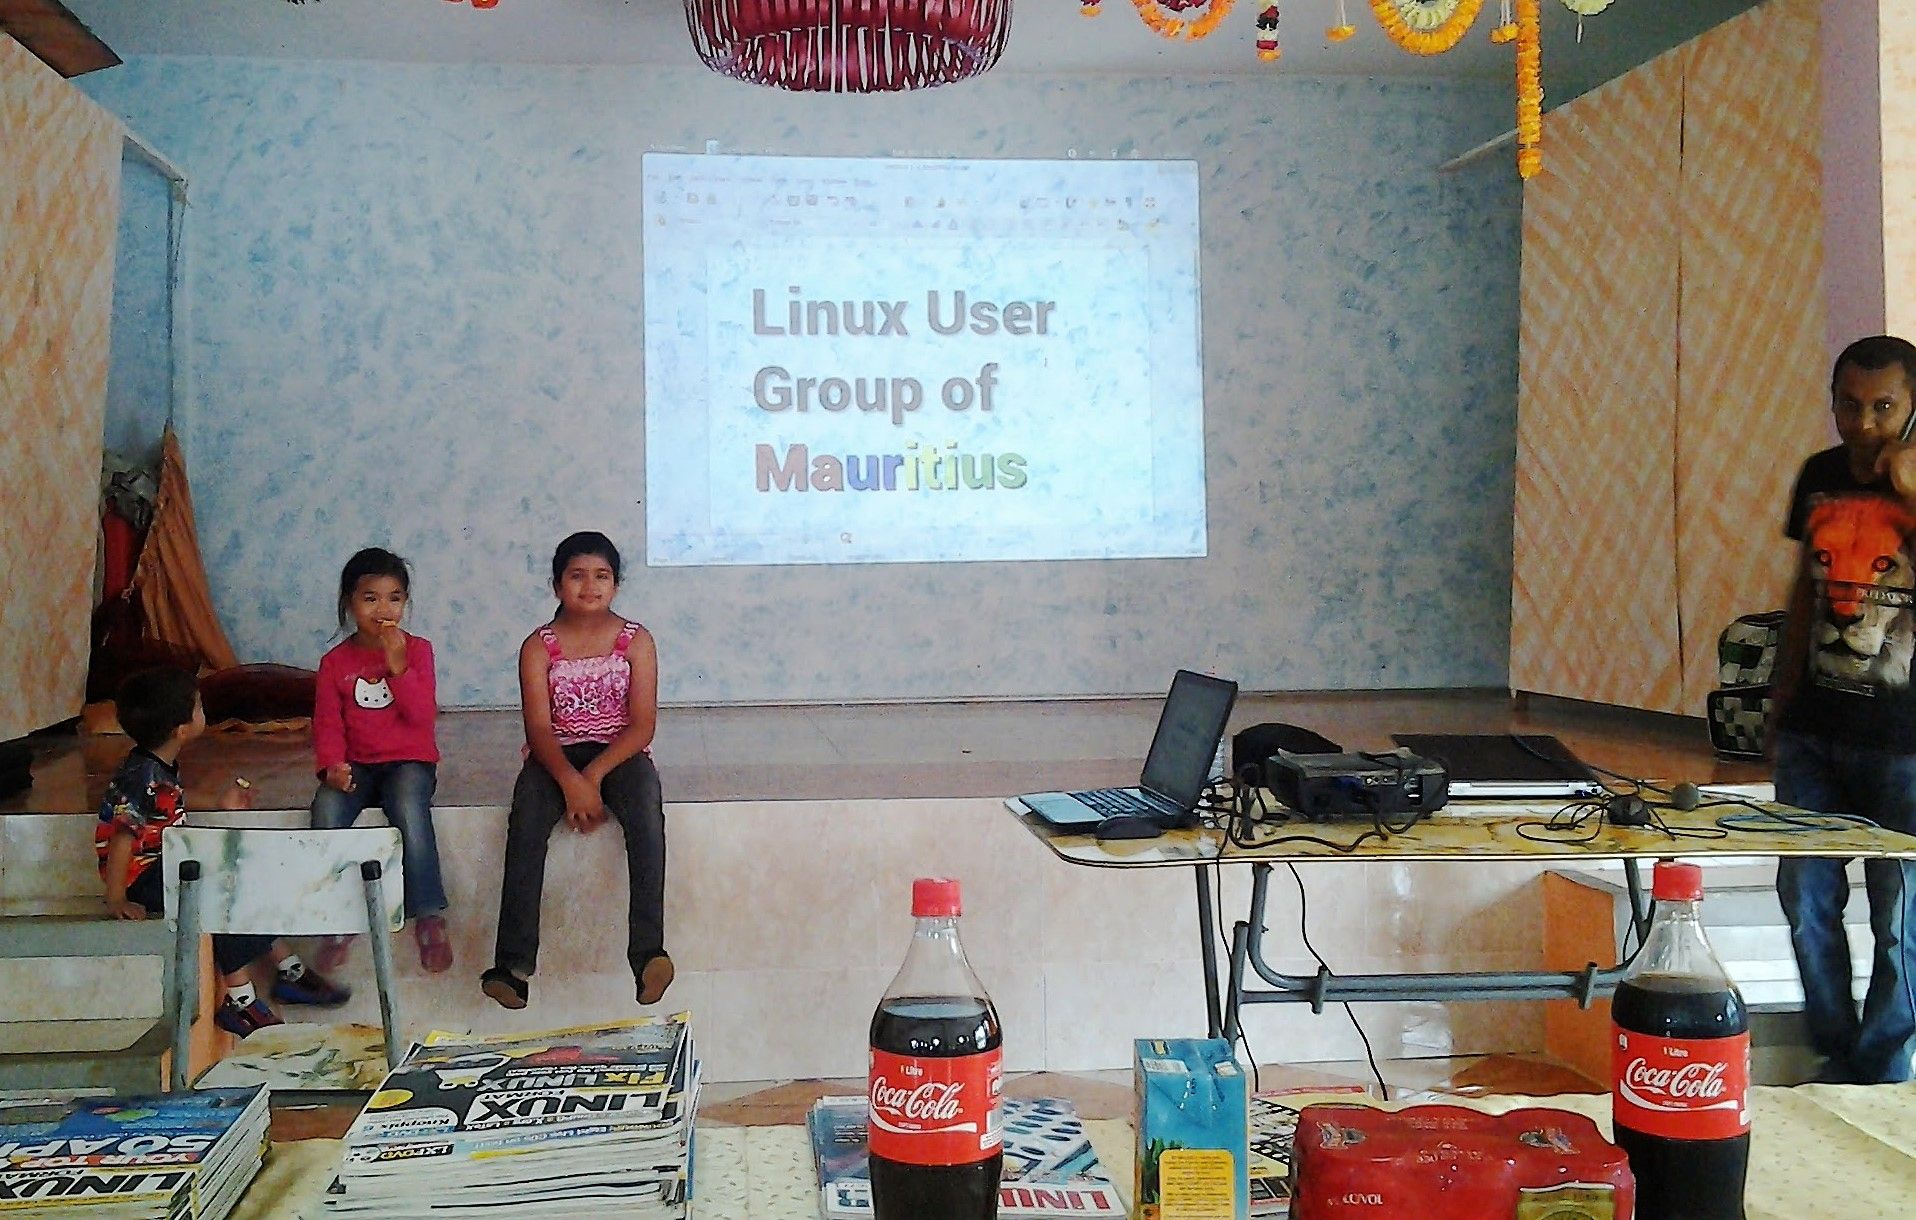 Feedback on meeting of the Linux User Group of Mauritius